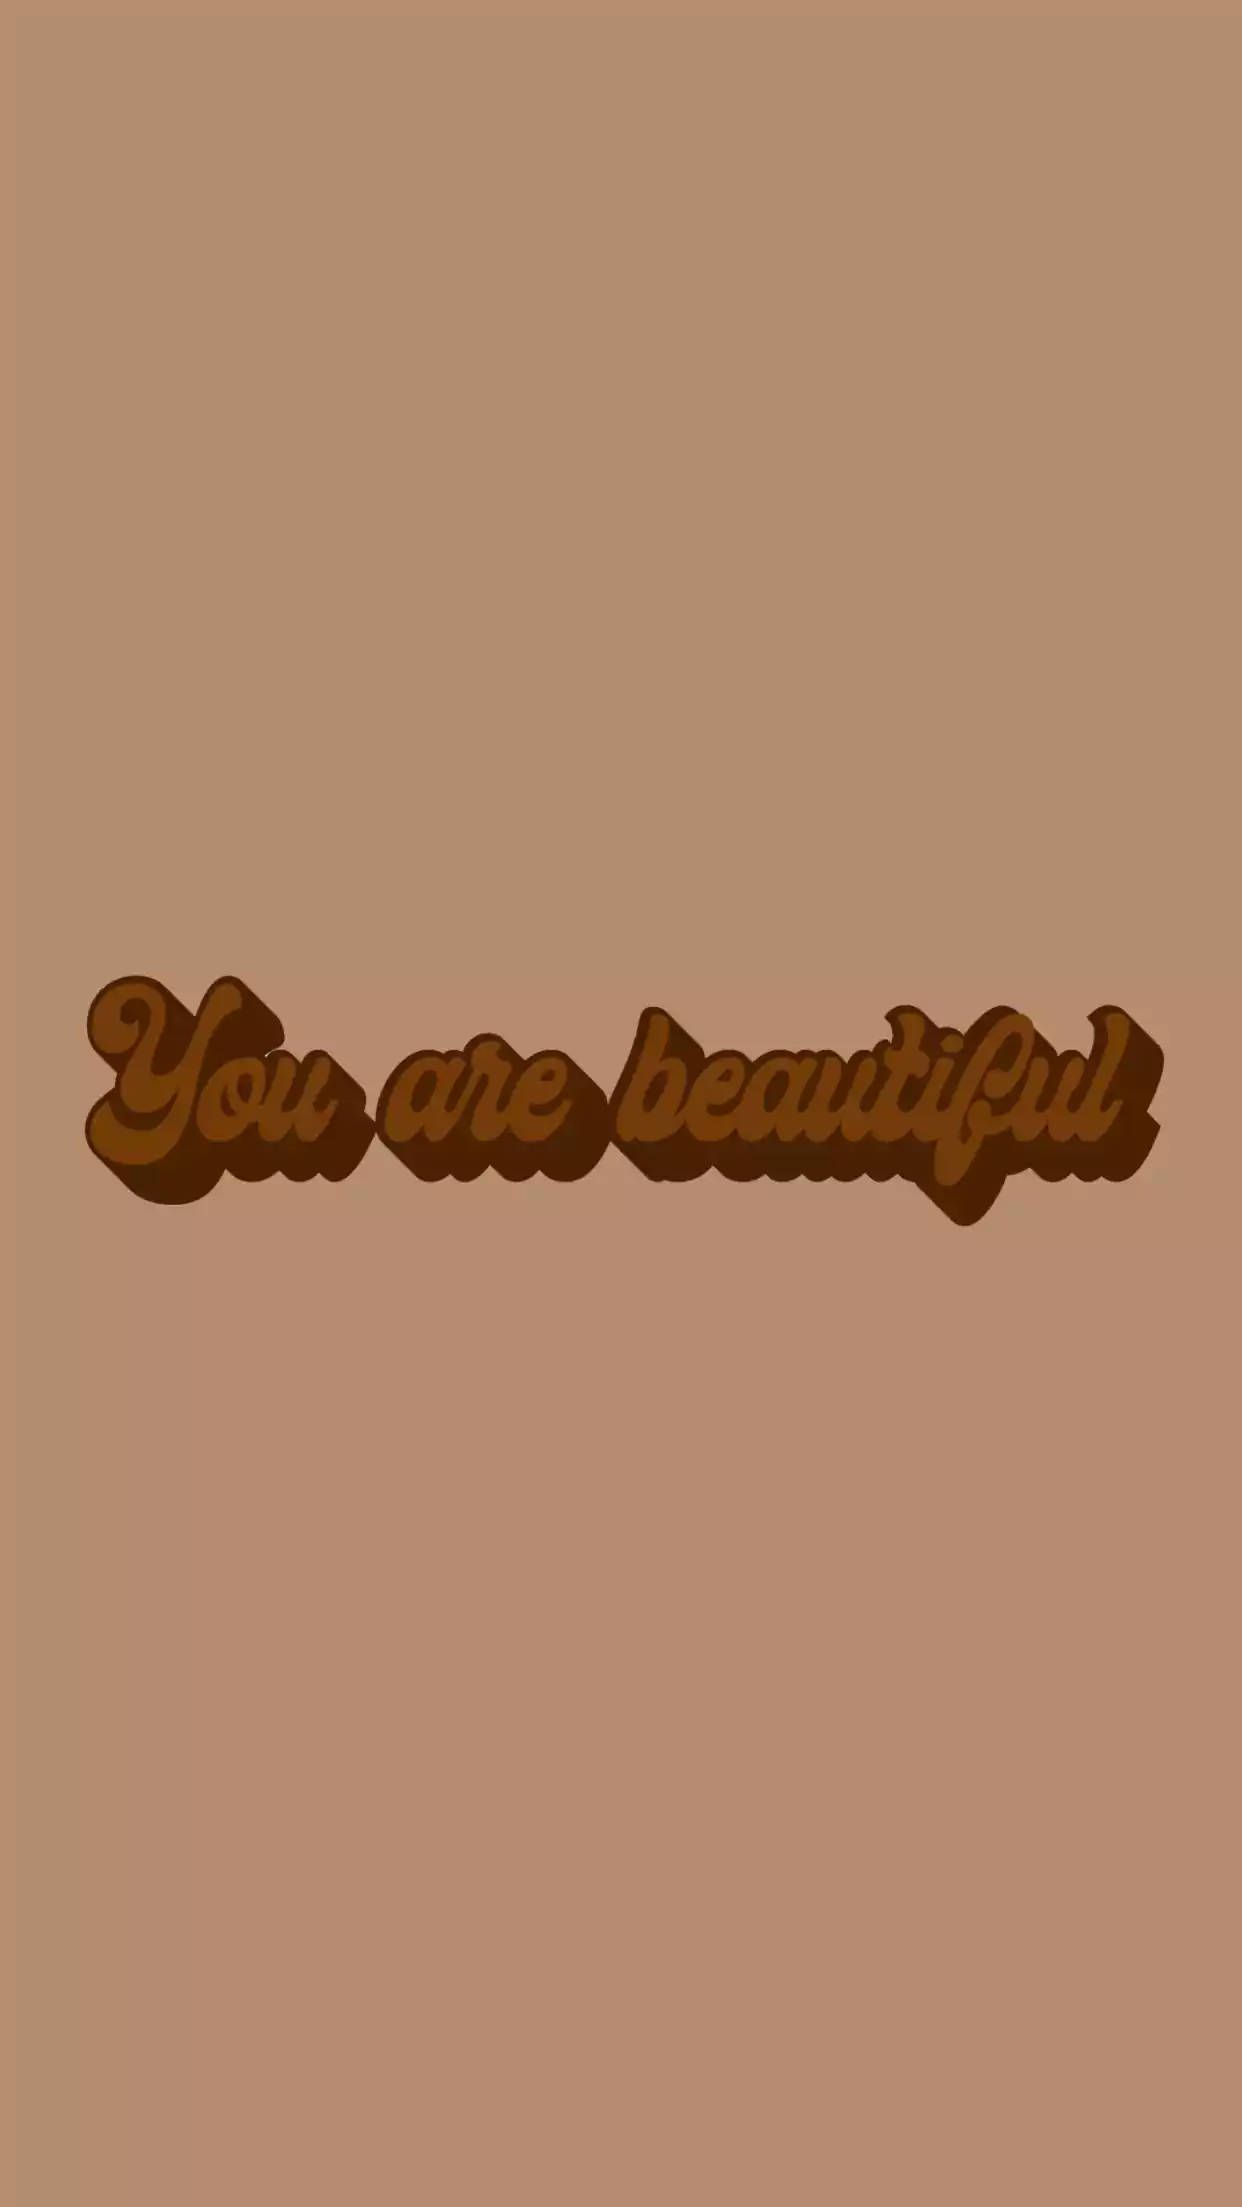 You are beautiful - Light brown